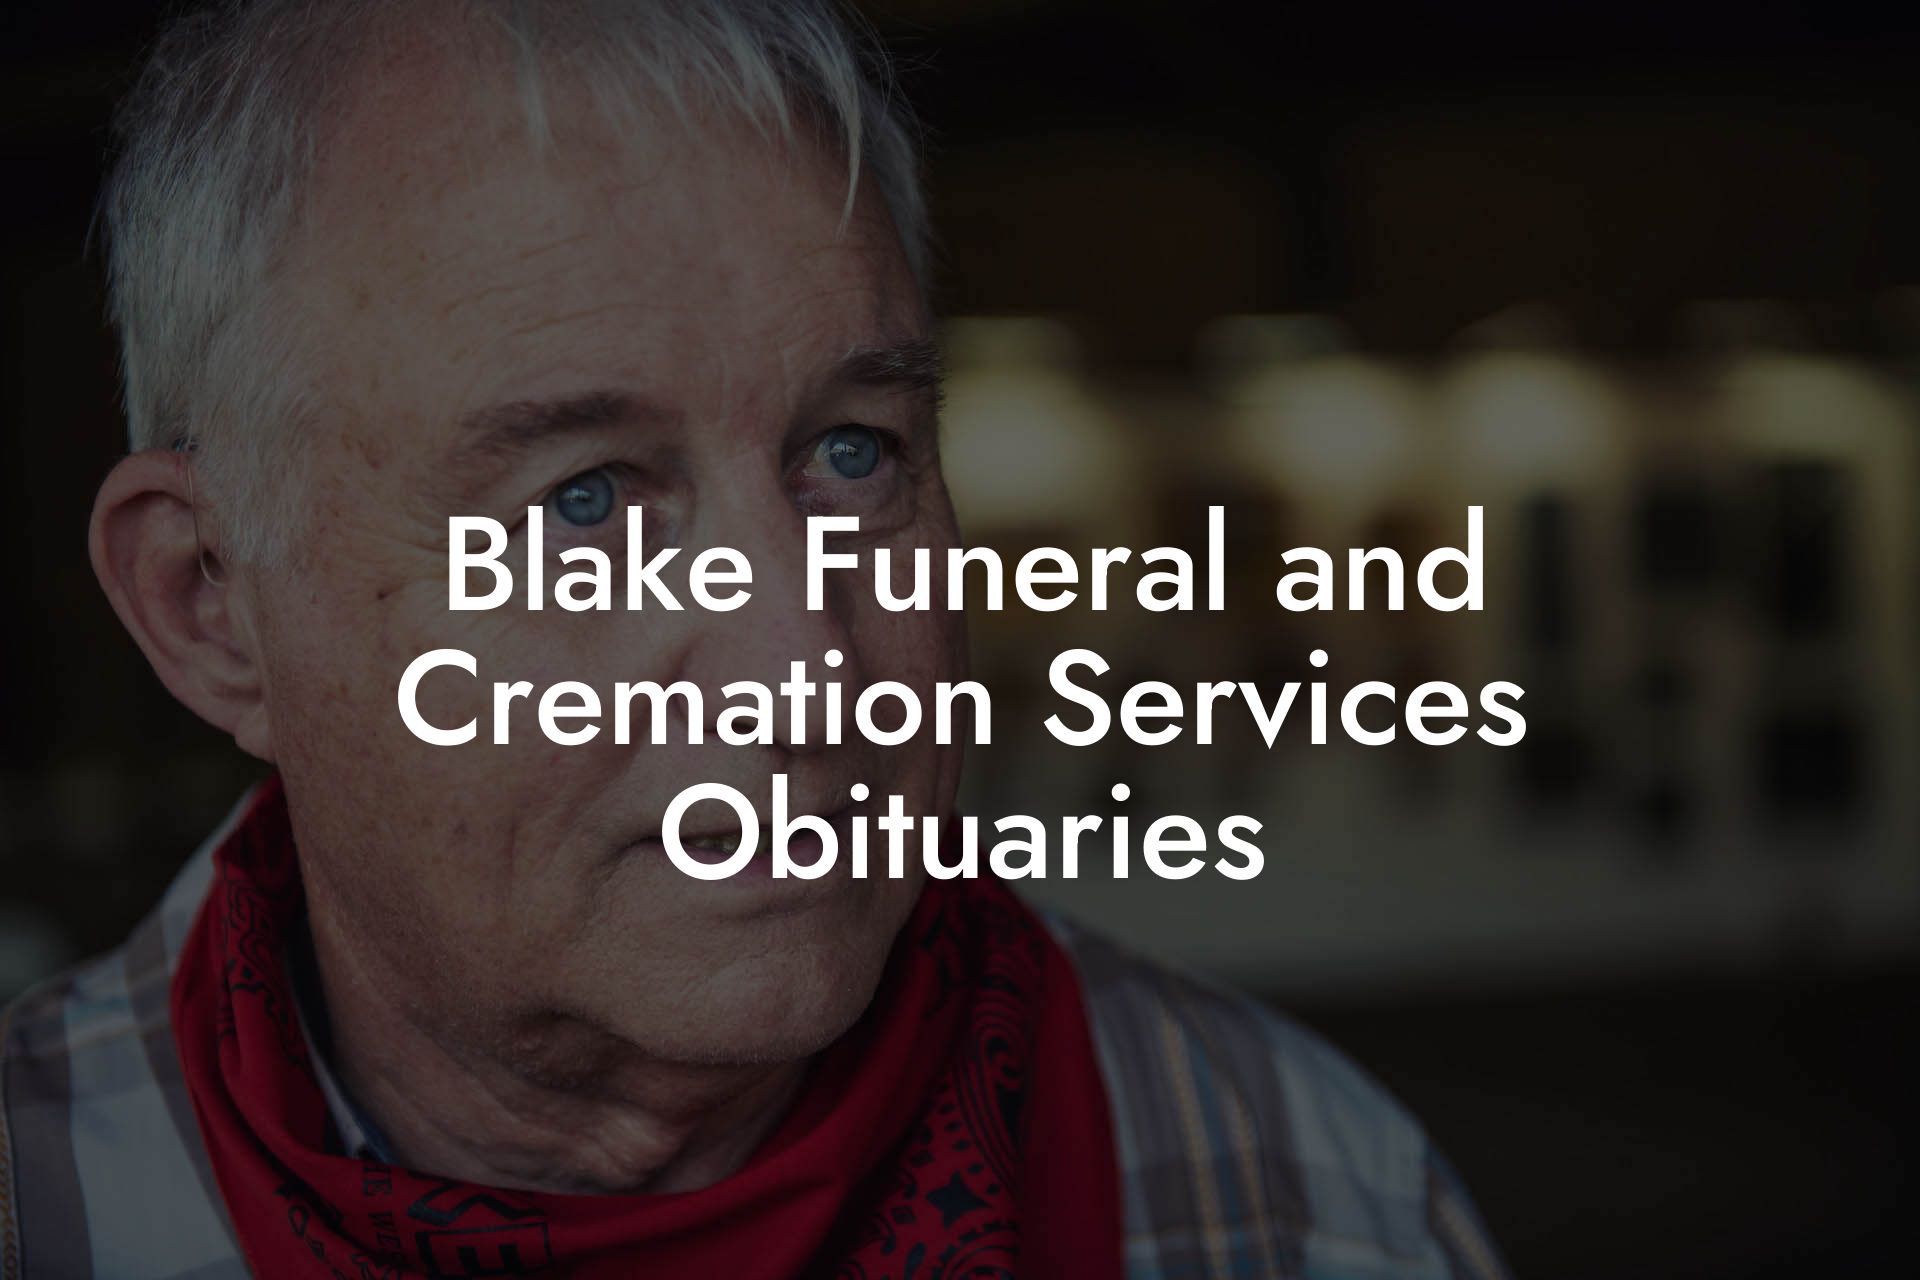 Blake Funeral and Cremation Services Obituaries